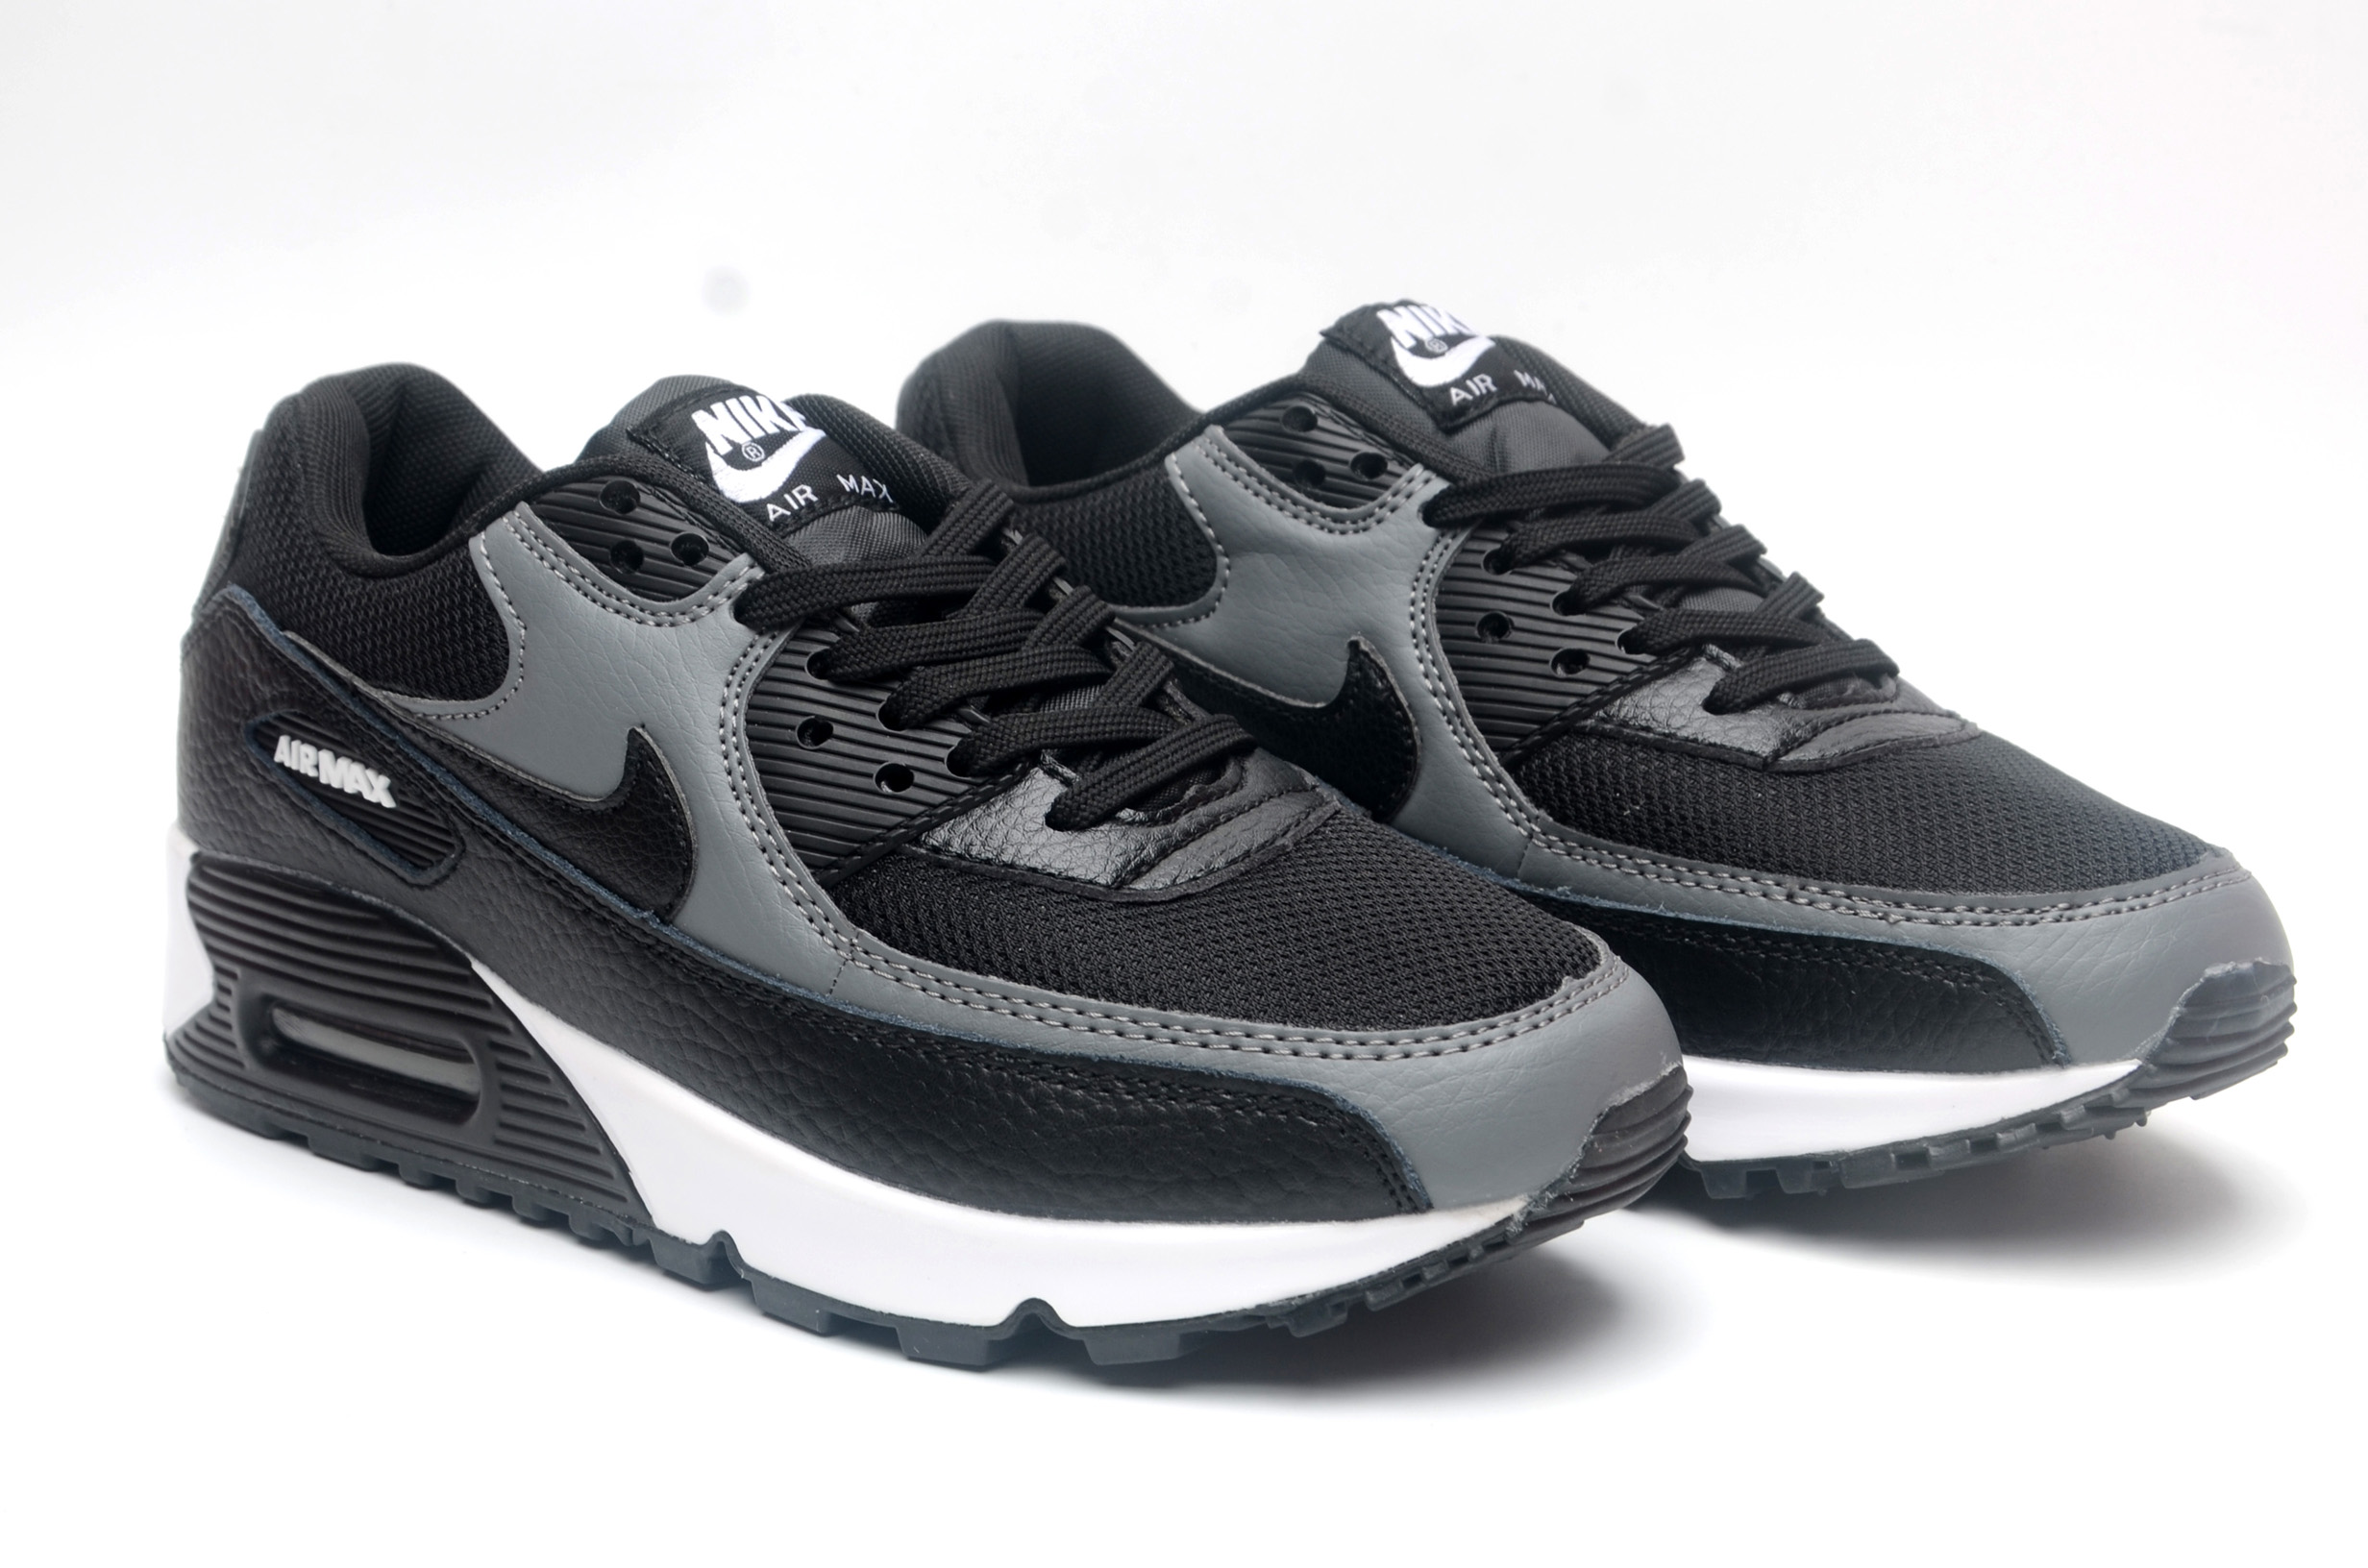 Women's Running weapon Air Max 90 Shoes 028